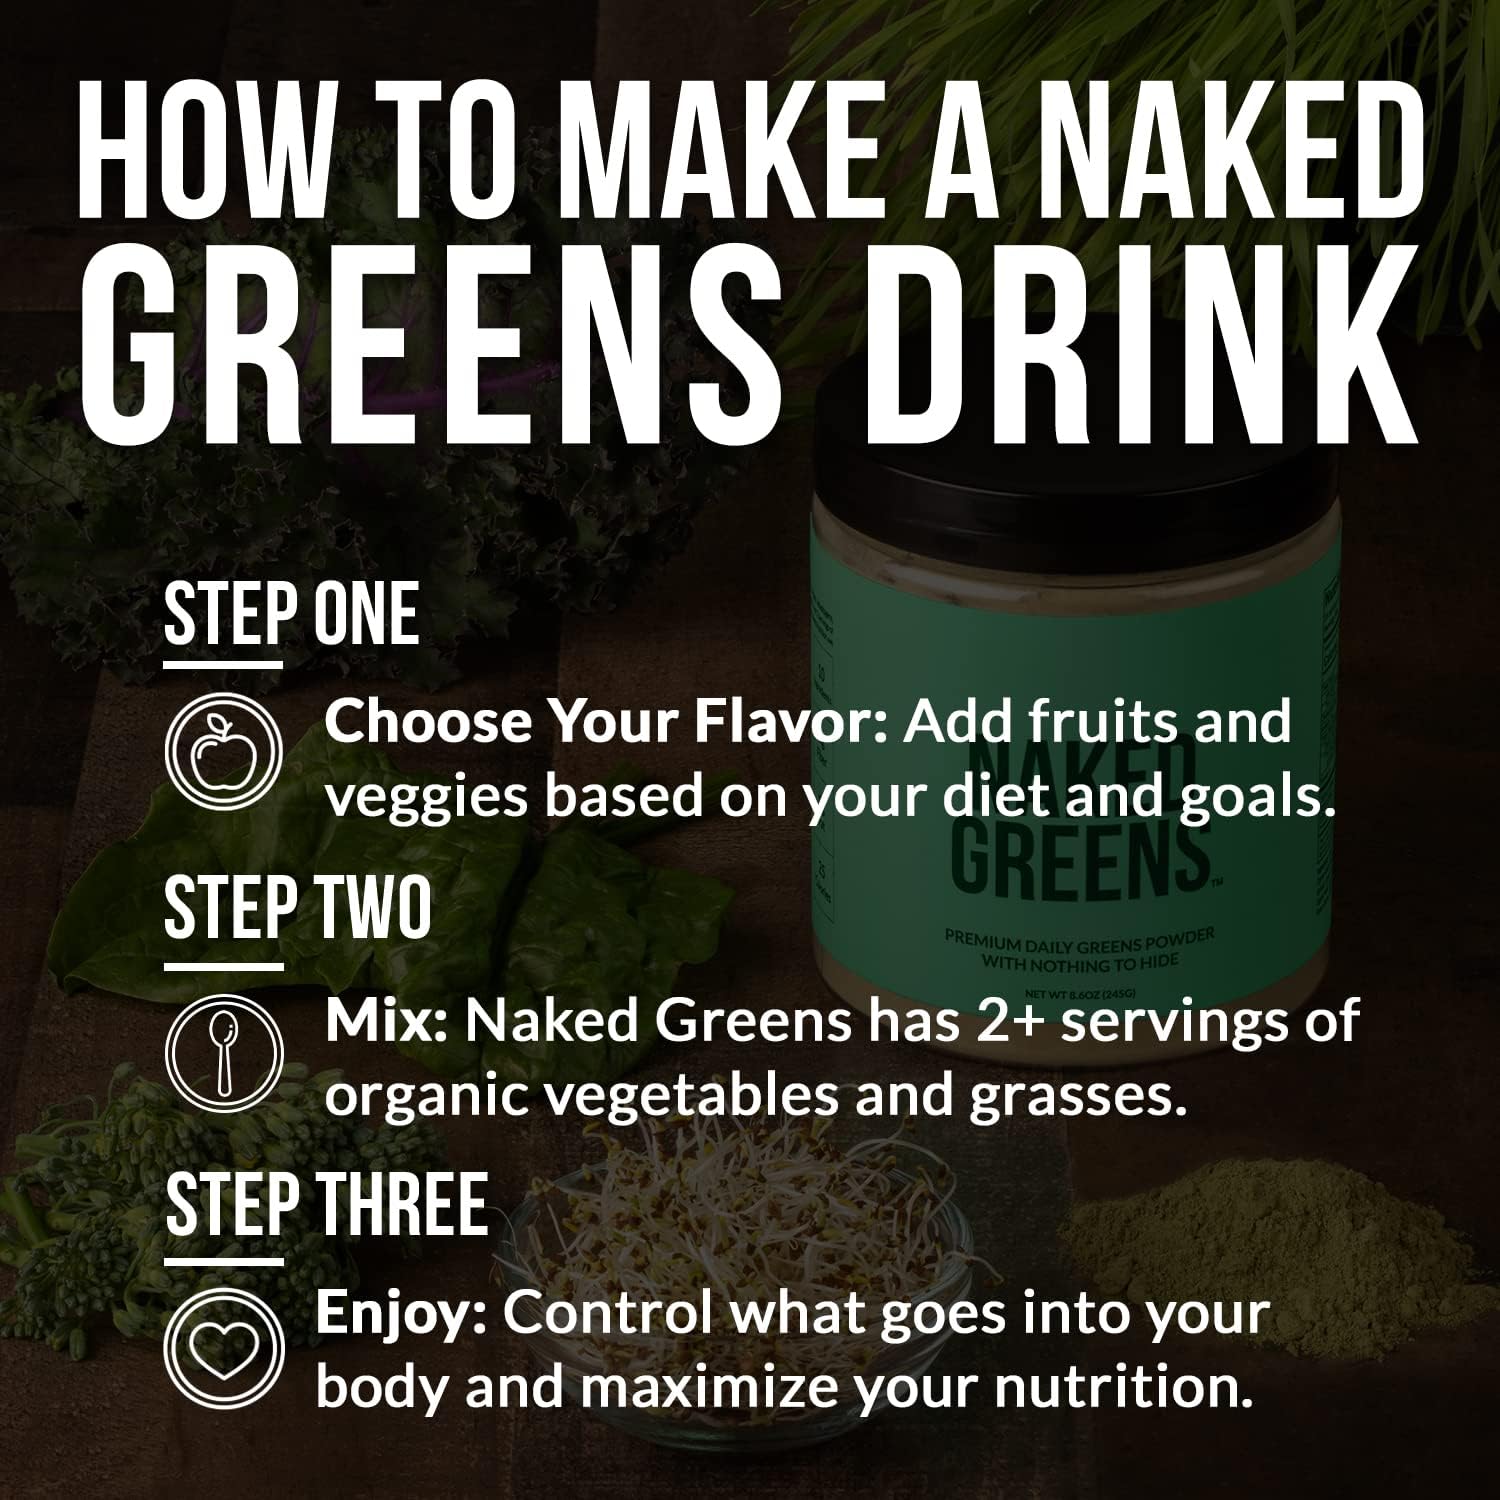 NAKED nutrition Super Greens Powder Organic Greens Supplement - Only 10 Premium Ingredients - Vegan, Non-GMO, Prebiotic and Probiotic - 35 Servings